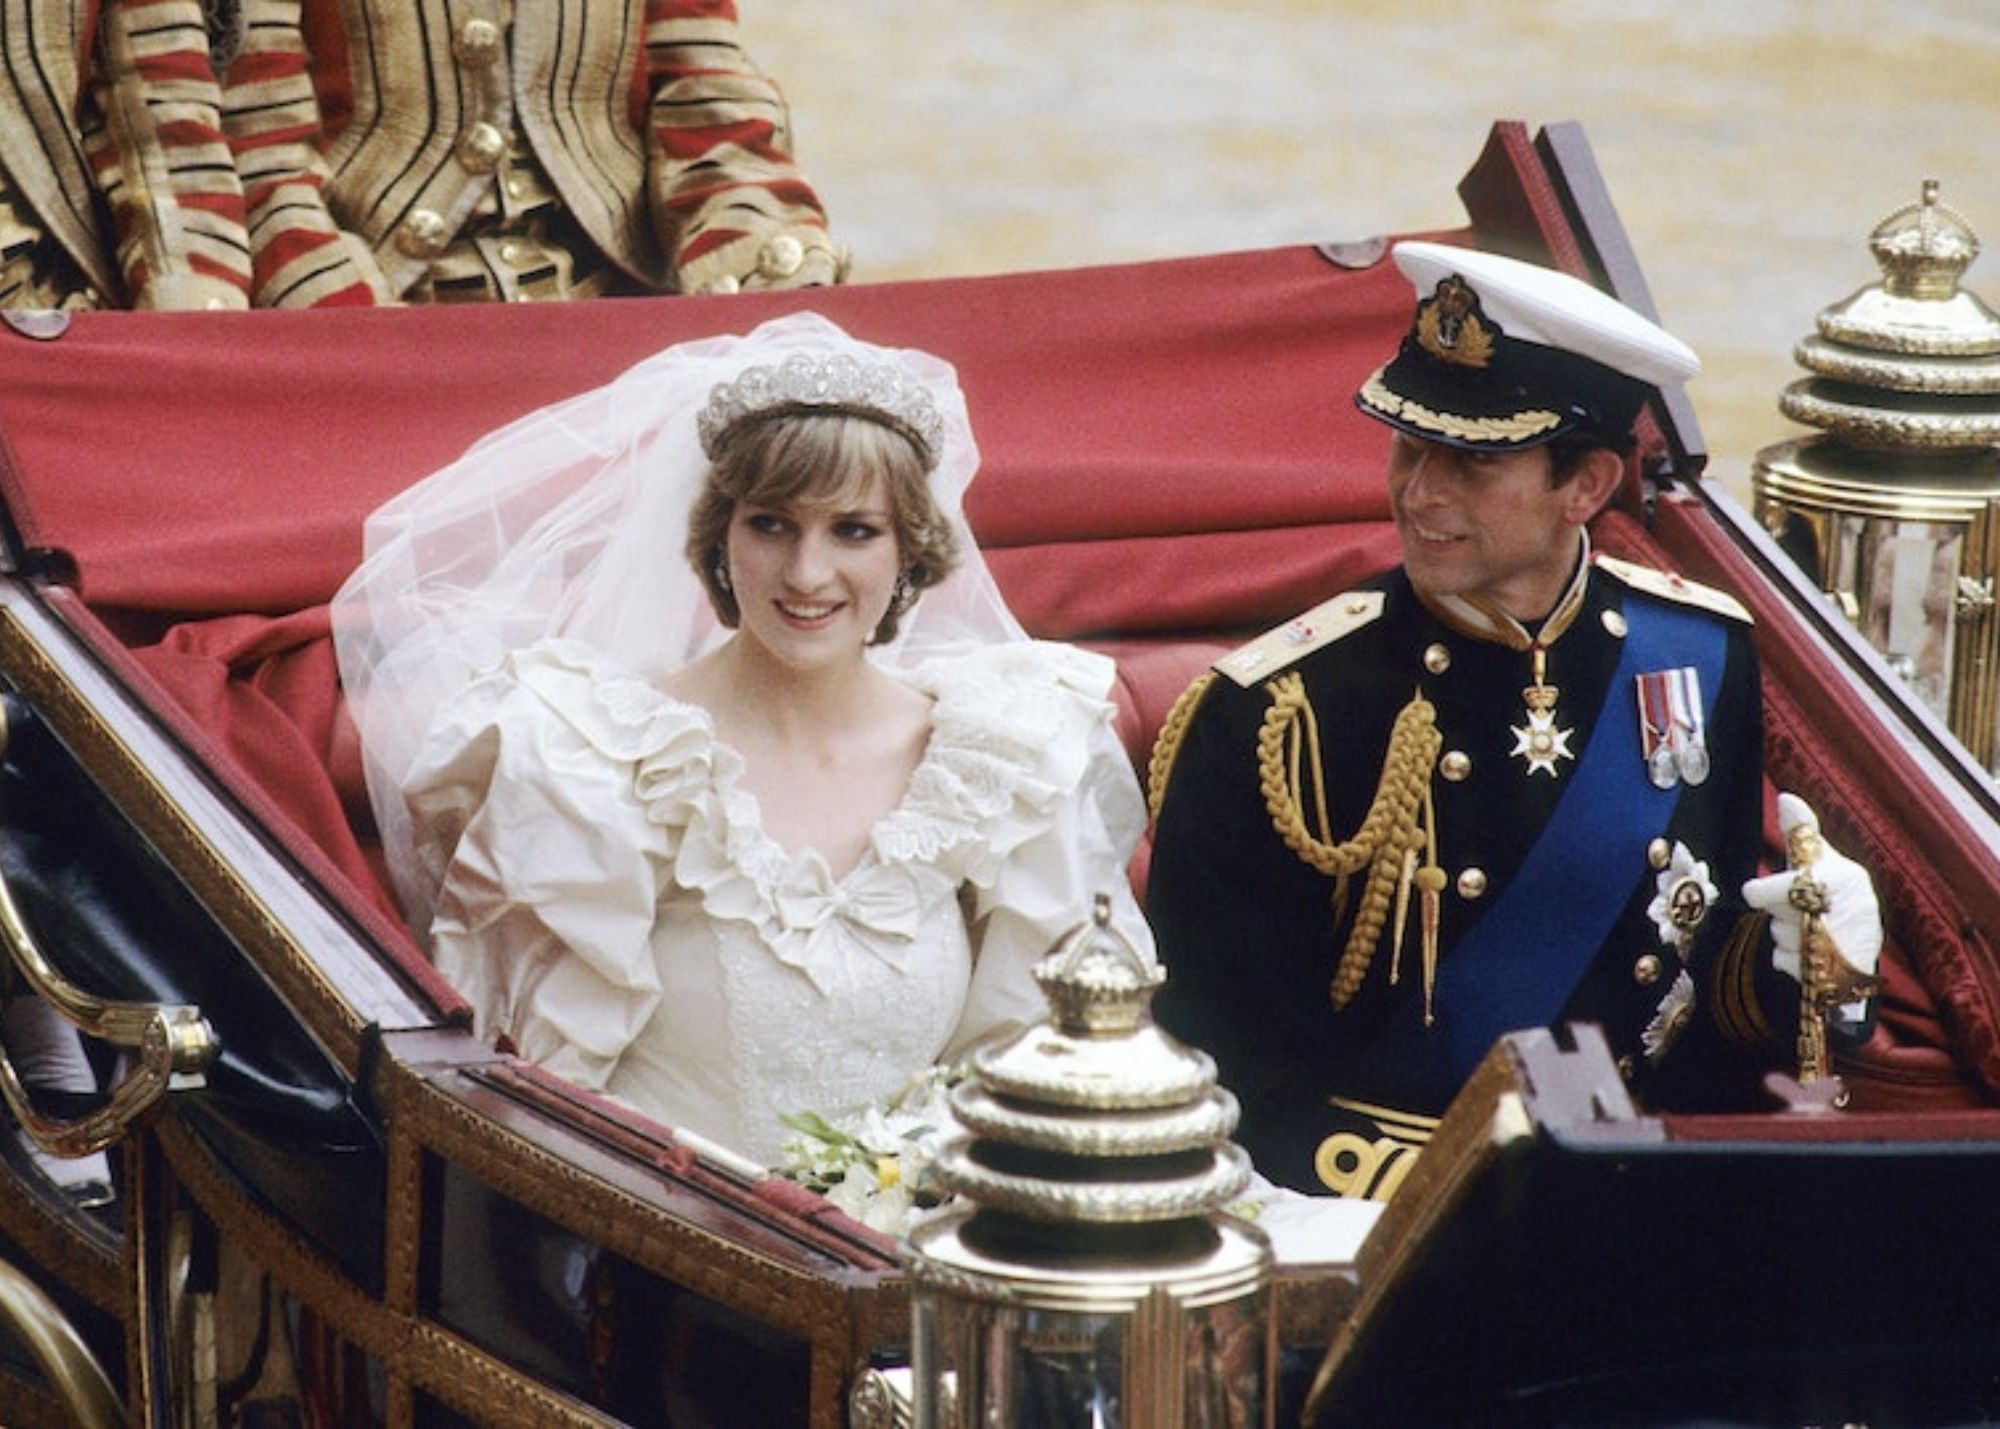 Princess Diana and Prince Charles are dressed in wedding attire and smiling at the crowds